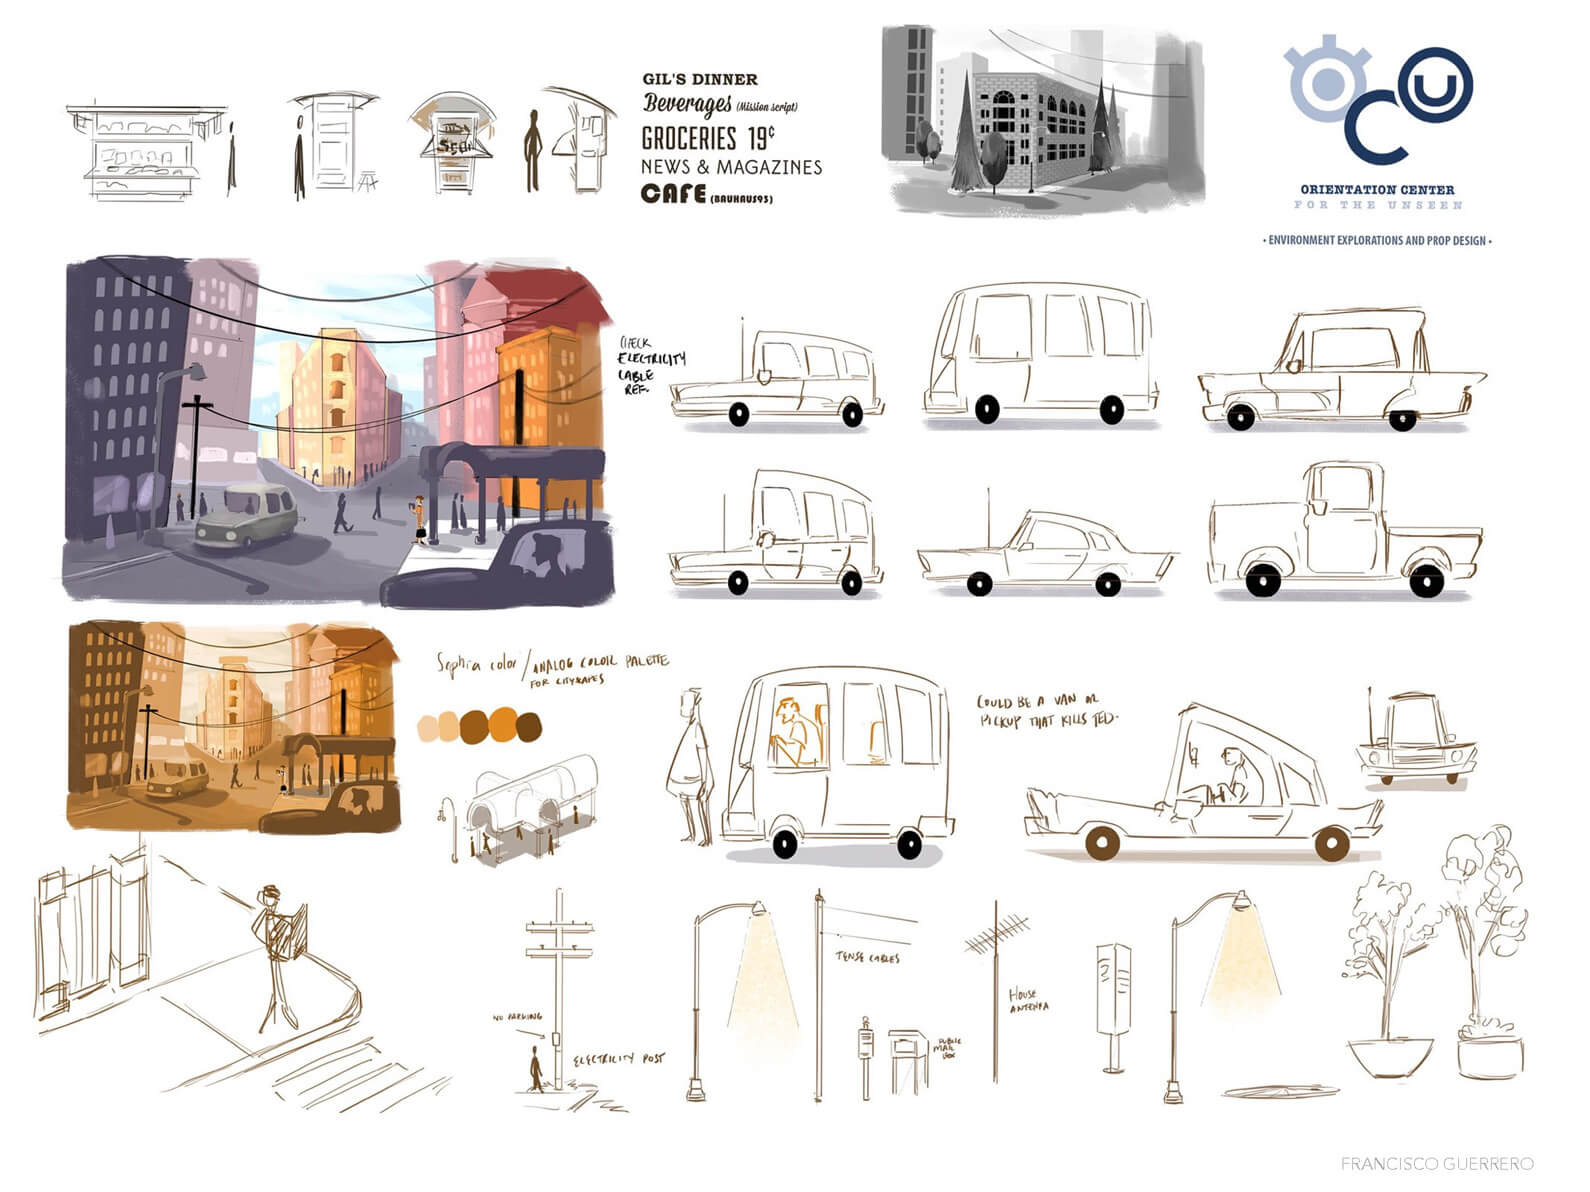 Environment and prop concept sketches for cars and street setting of Orientation Center for the Unseen